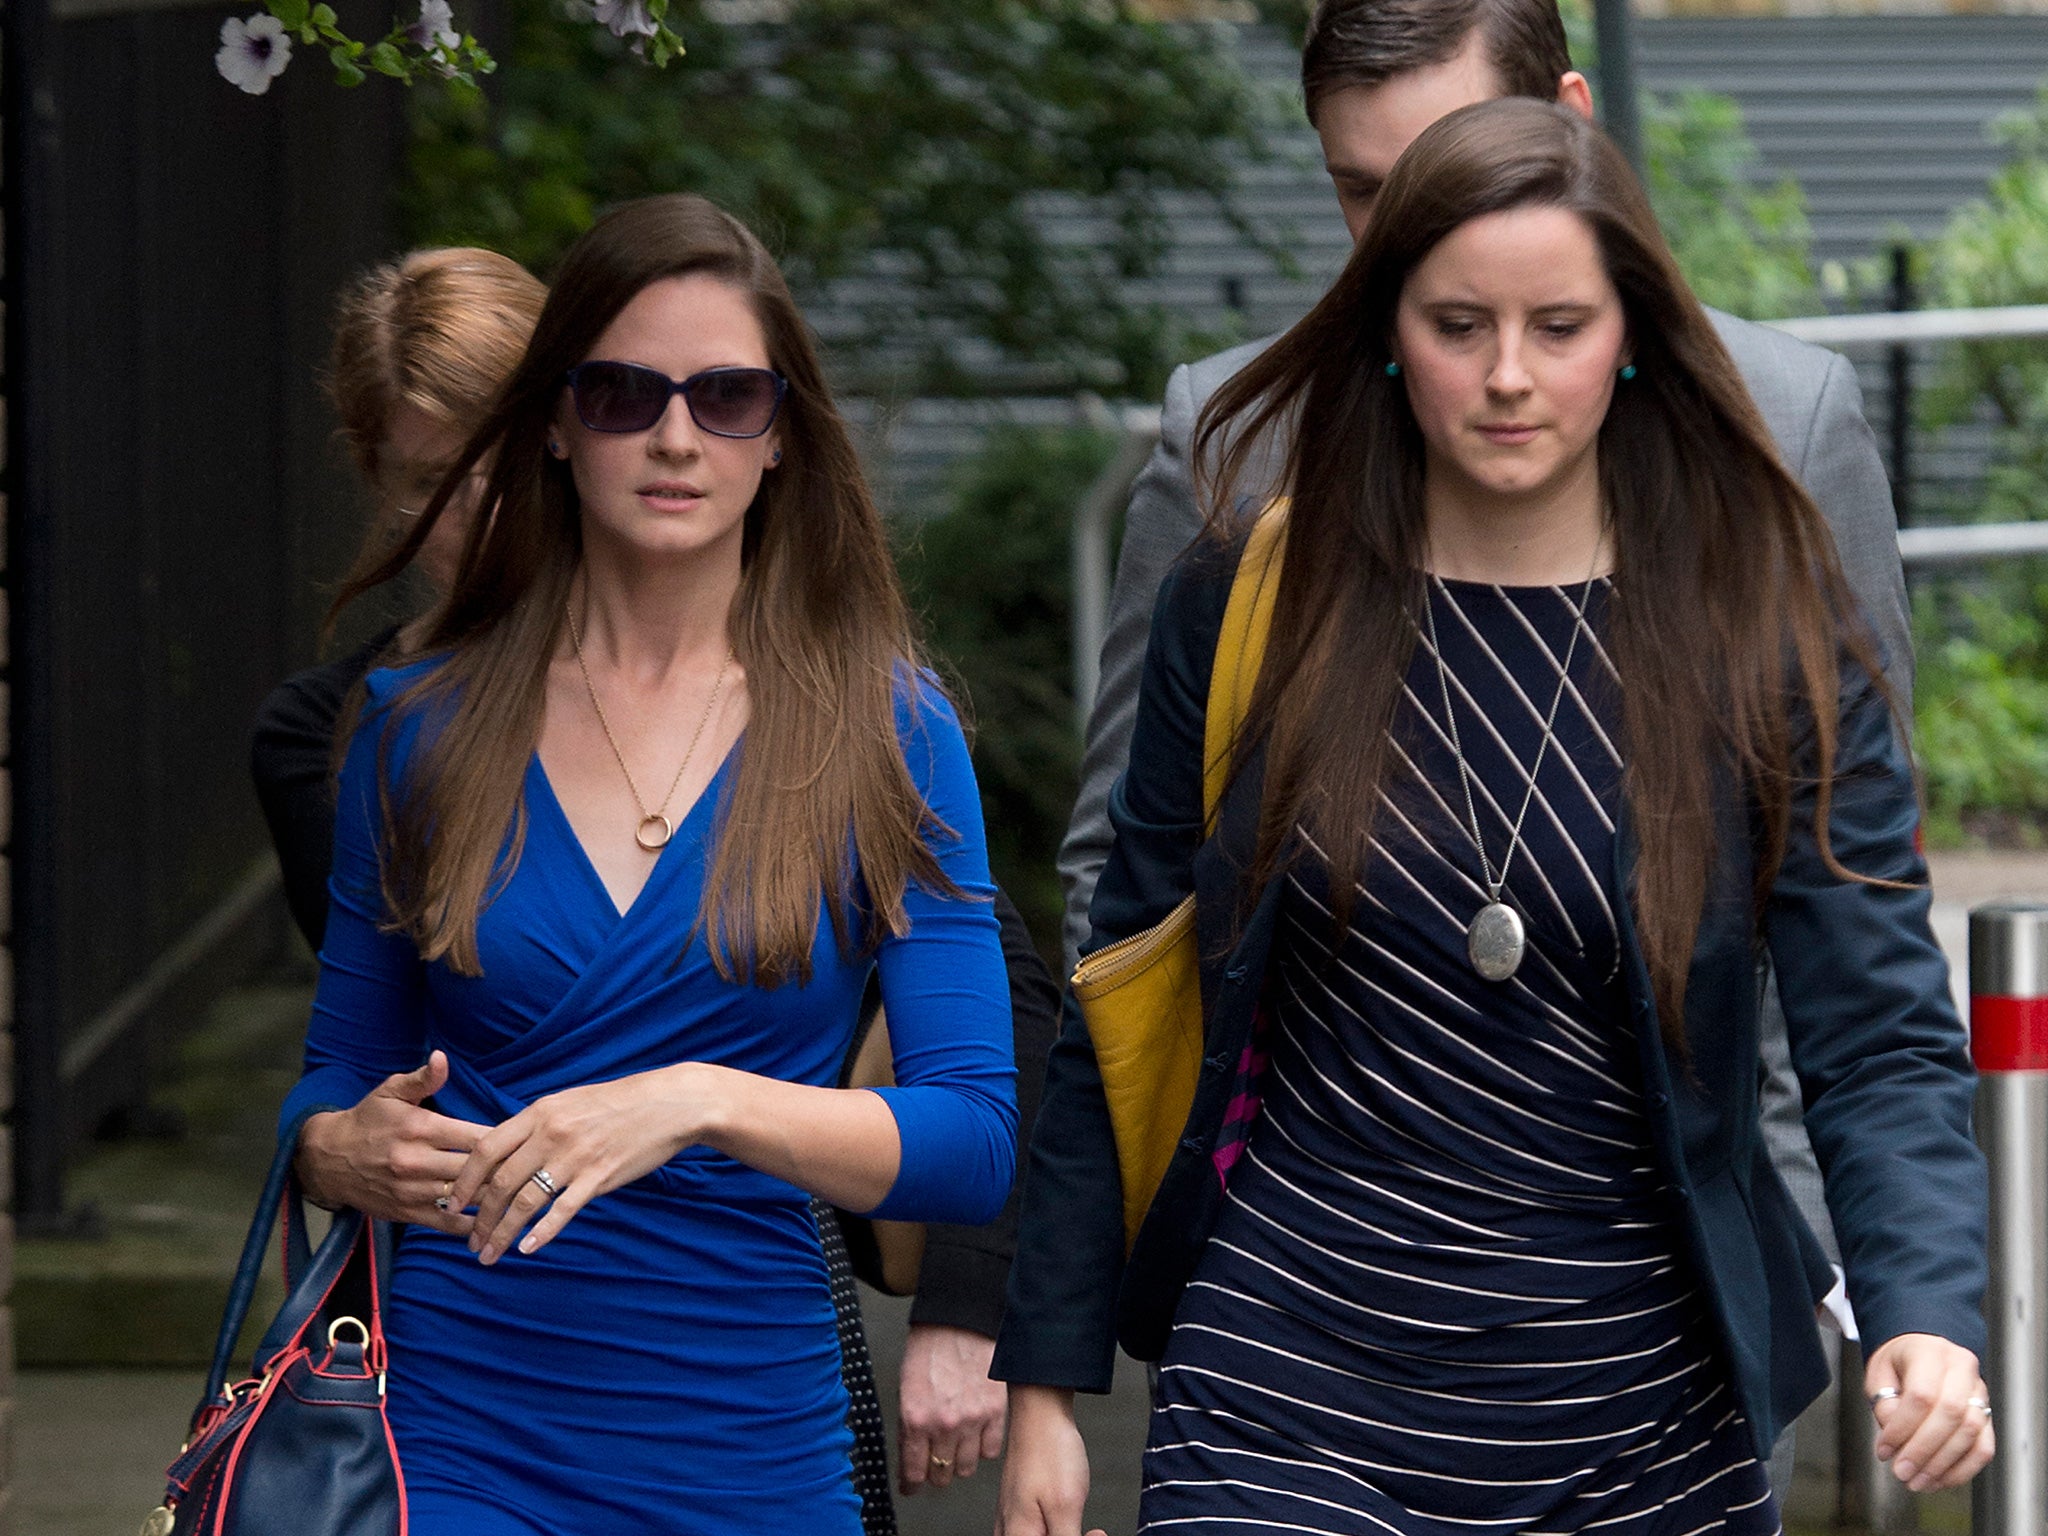 The widow of Corporal James Dunsby, Bryher Dunsby (left), arrives at the Civic Suite in Solihull for the inquest into her husband's death